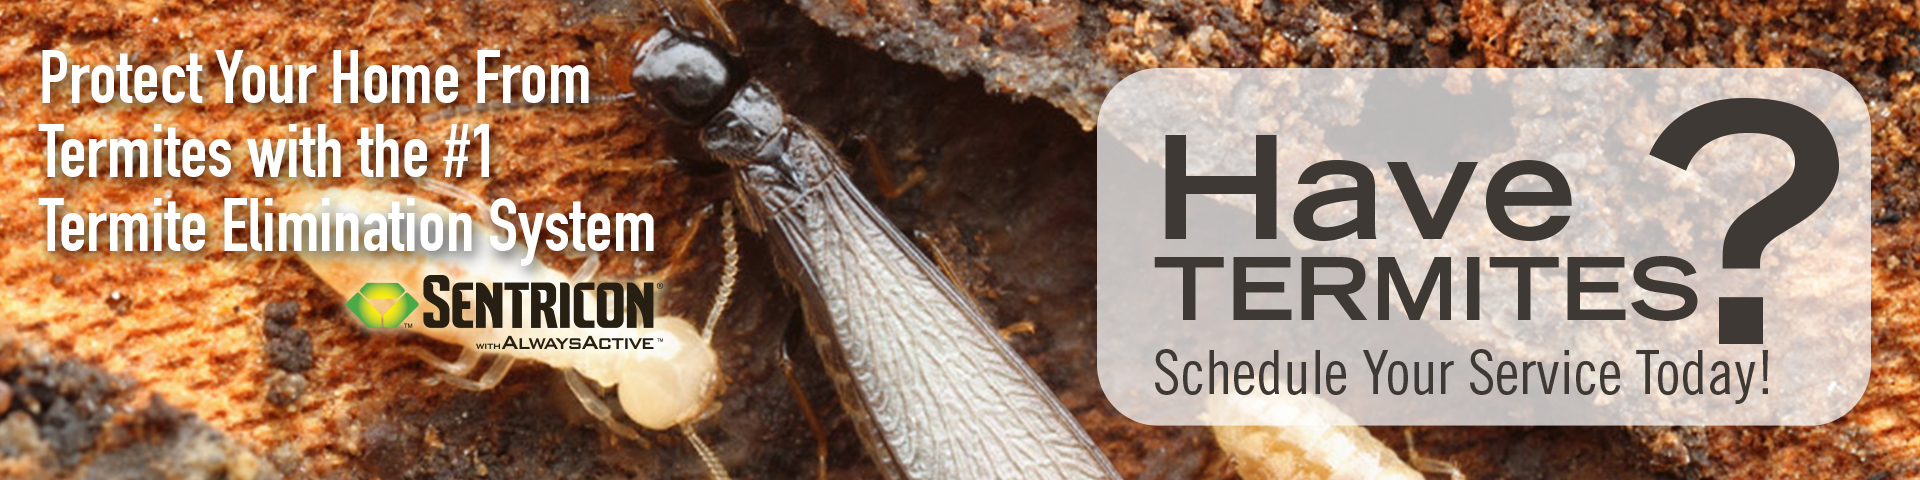 Termite Protection and Elimination-Barnetts Termite and Pest Control